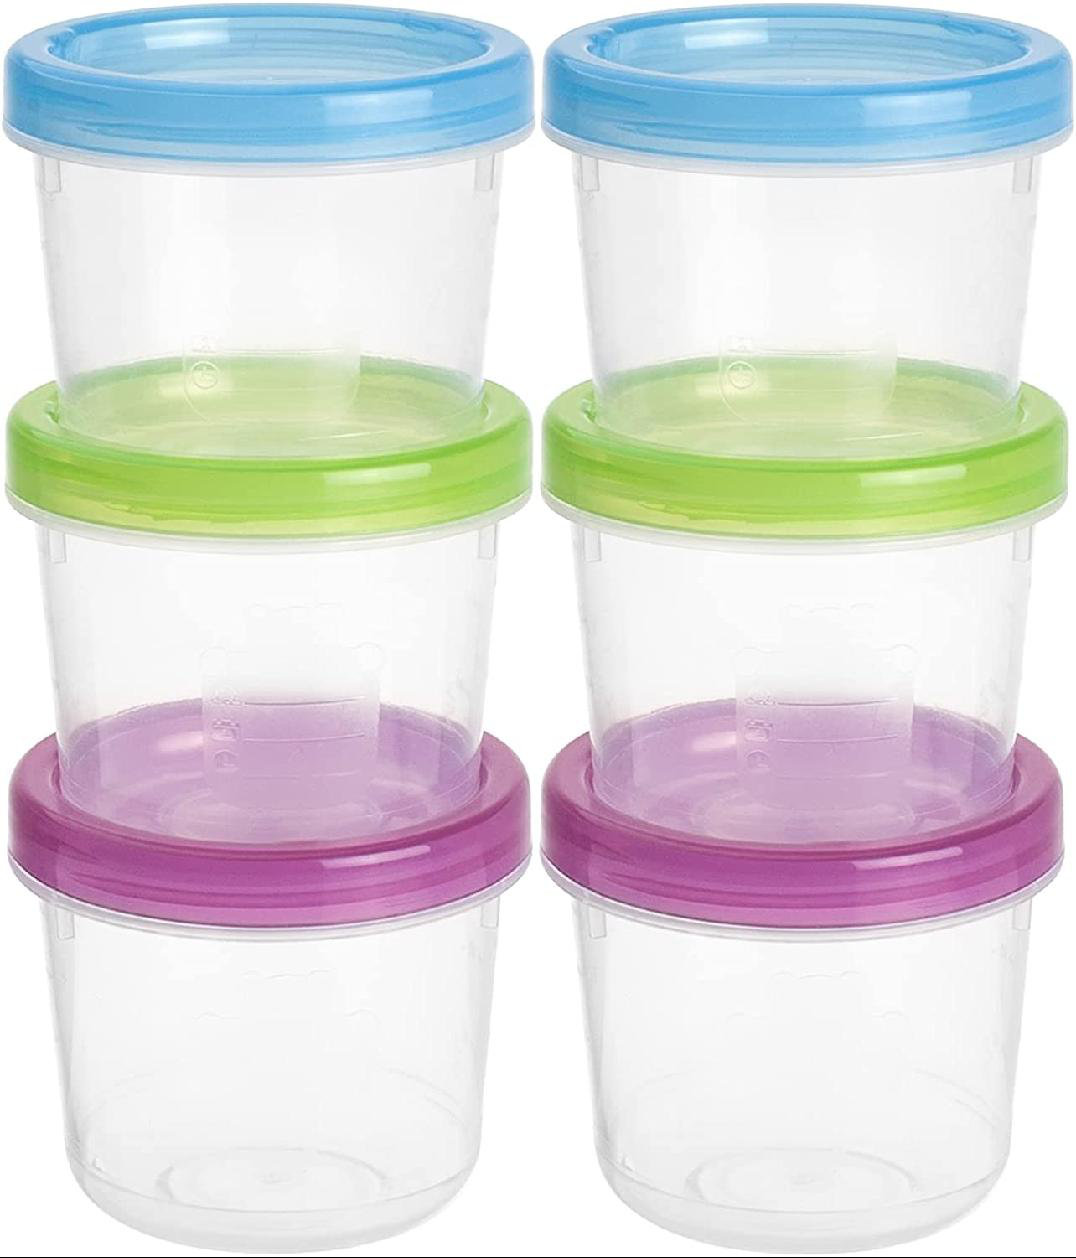  Pack of 6 Food Storage Sandwich Containers, 2 cups / 16 oz /  490 ml - 3 Different Designs. Great for Meal Prep. Kids or Adult Lunch Box  - BPA Free and Reusable: Home & Kitchen